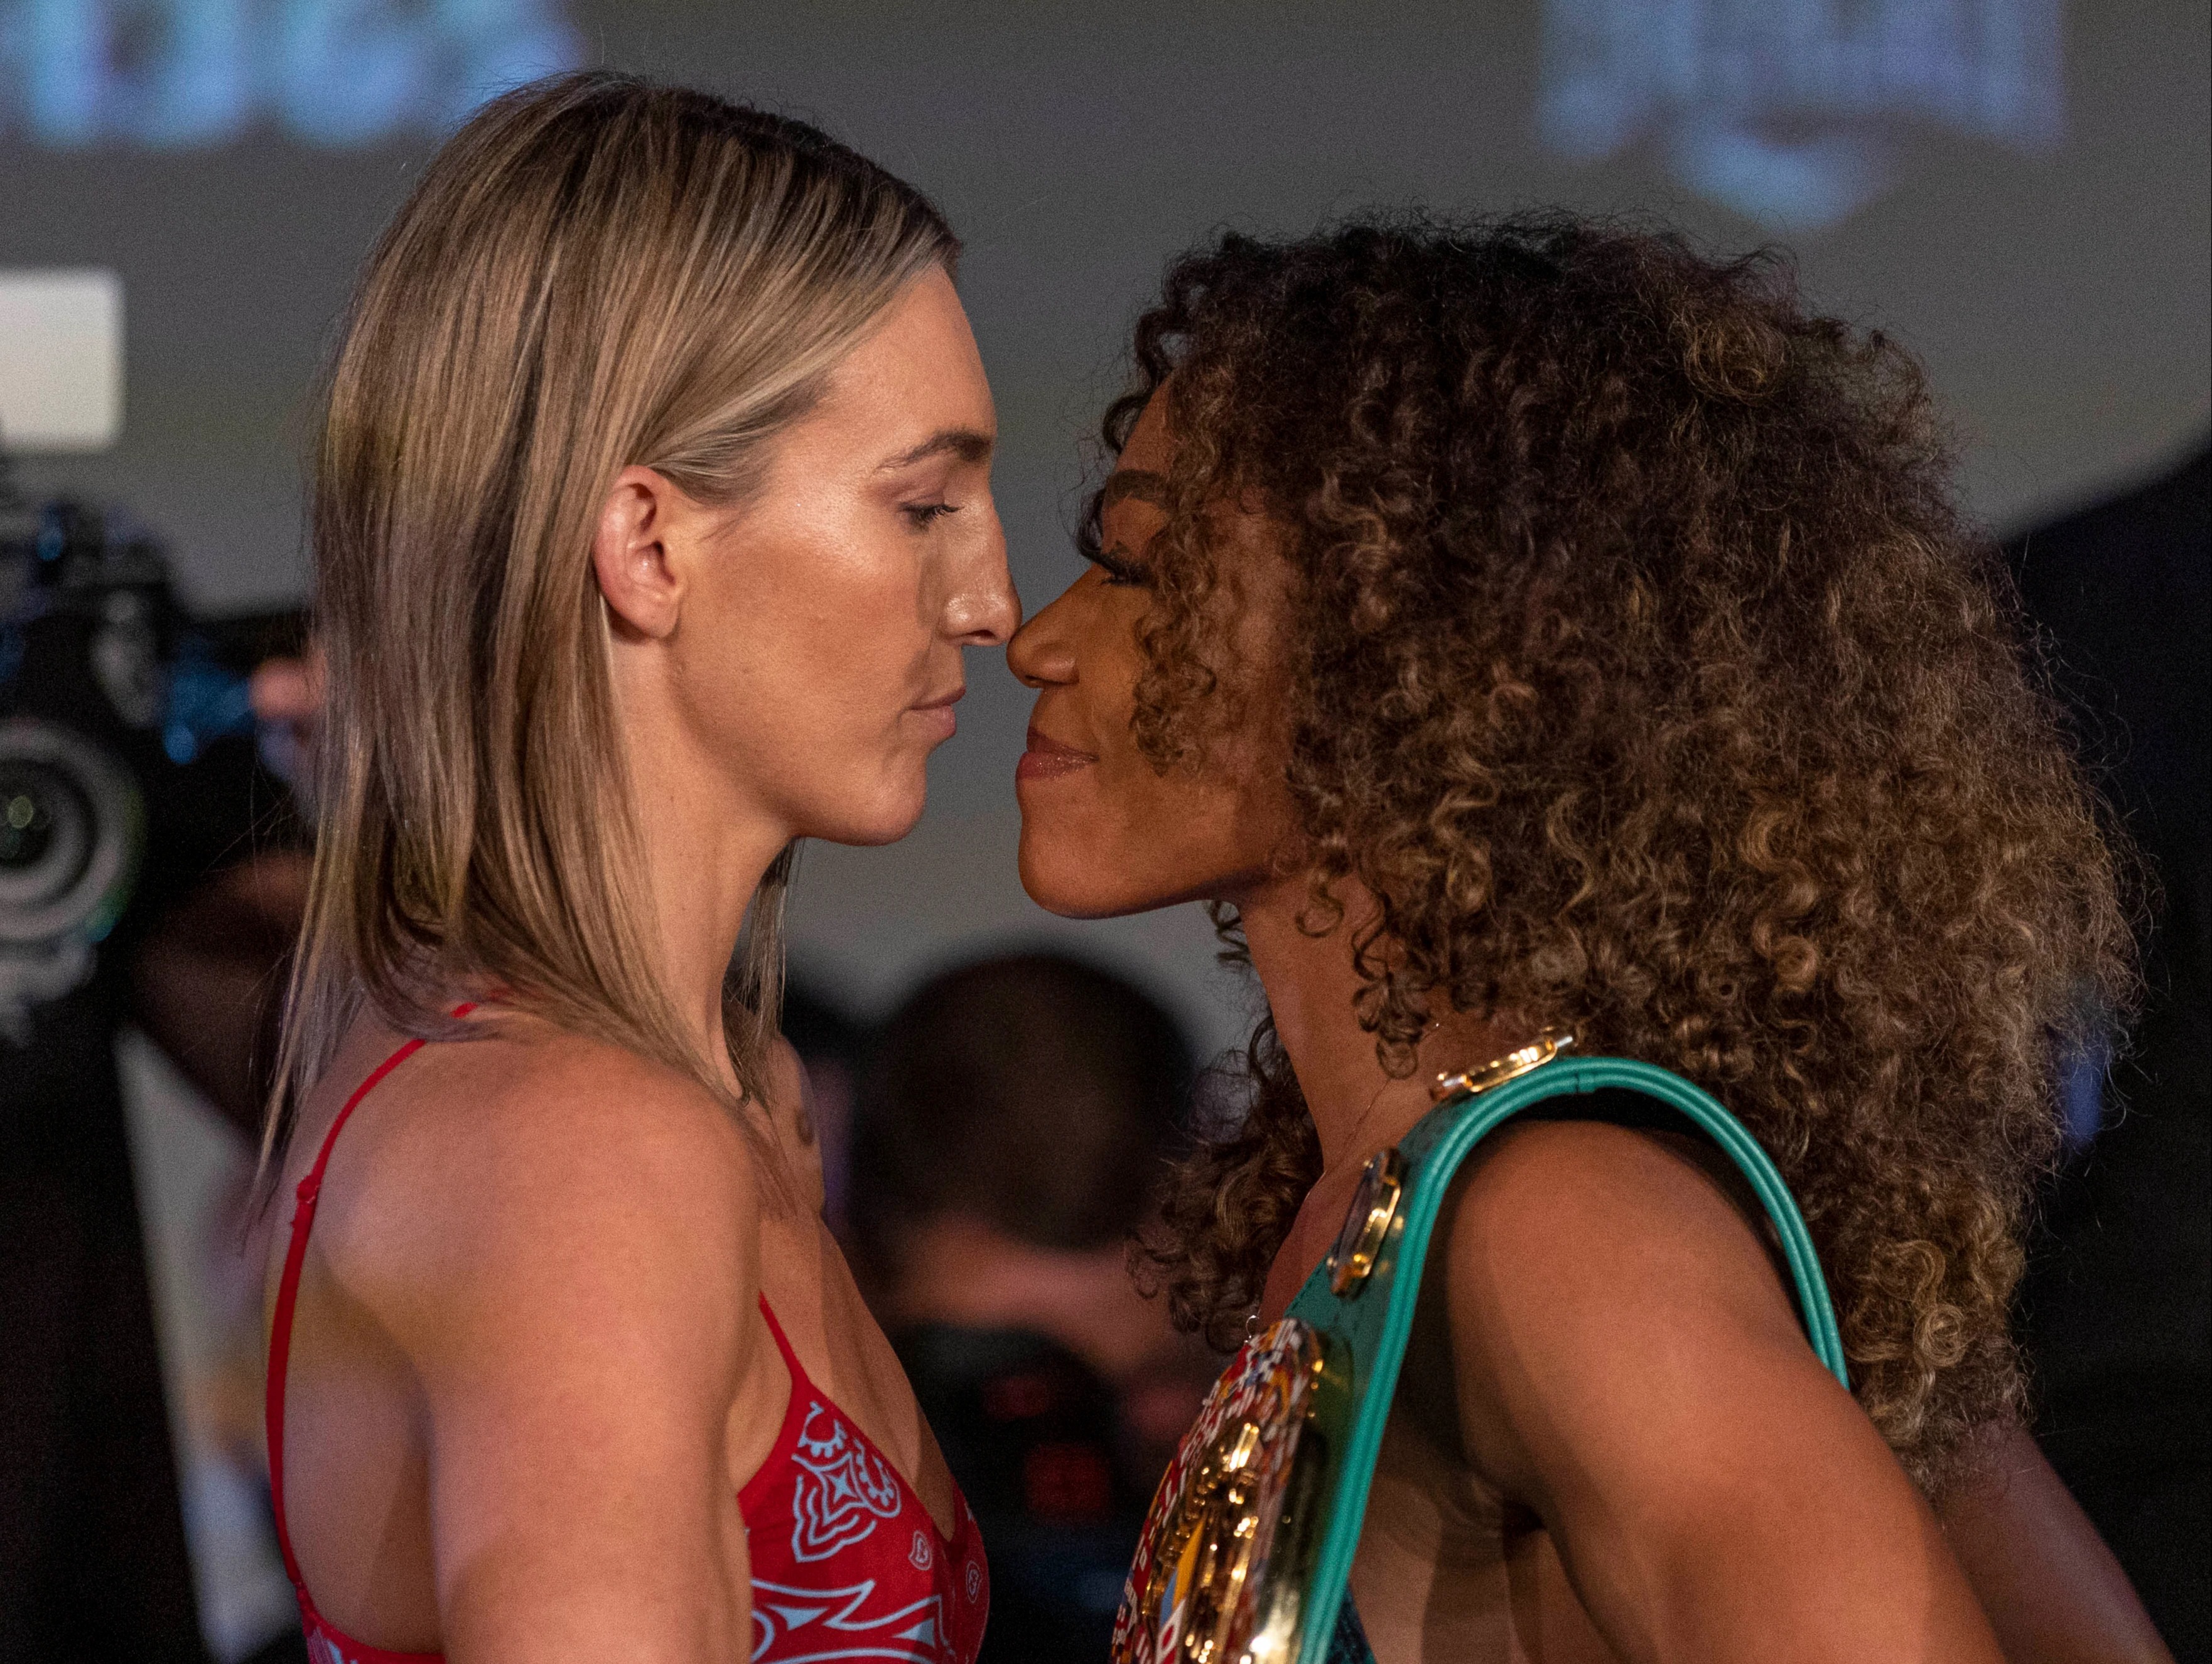 , Watch Mikaela Mayer KICK OUT at Alycia Baumgardner as boxing rivals forced apart by security AGAIN ahead of grudge fight